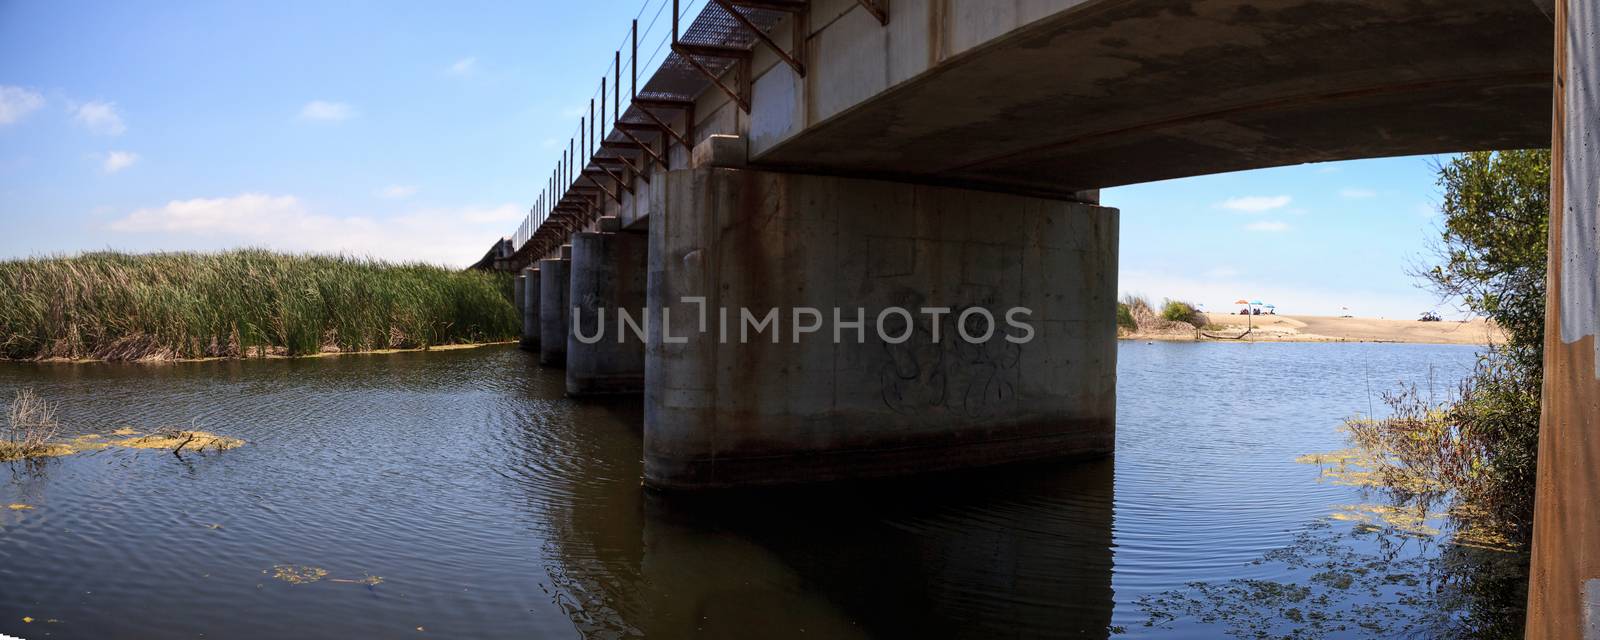 Water under the railroad track bridge leading down to the ocean by steffstarr